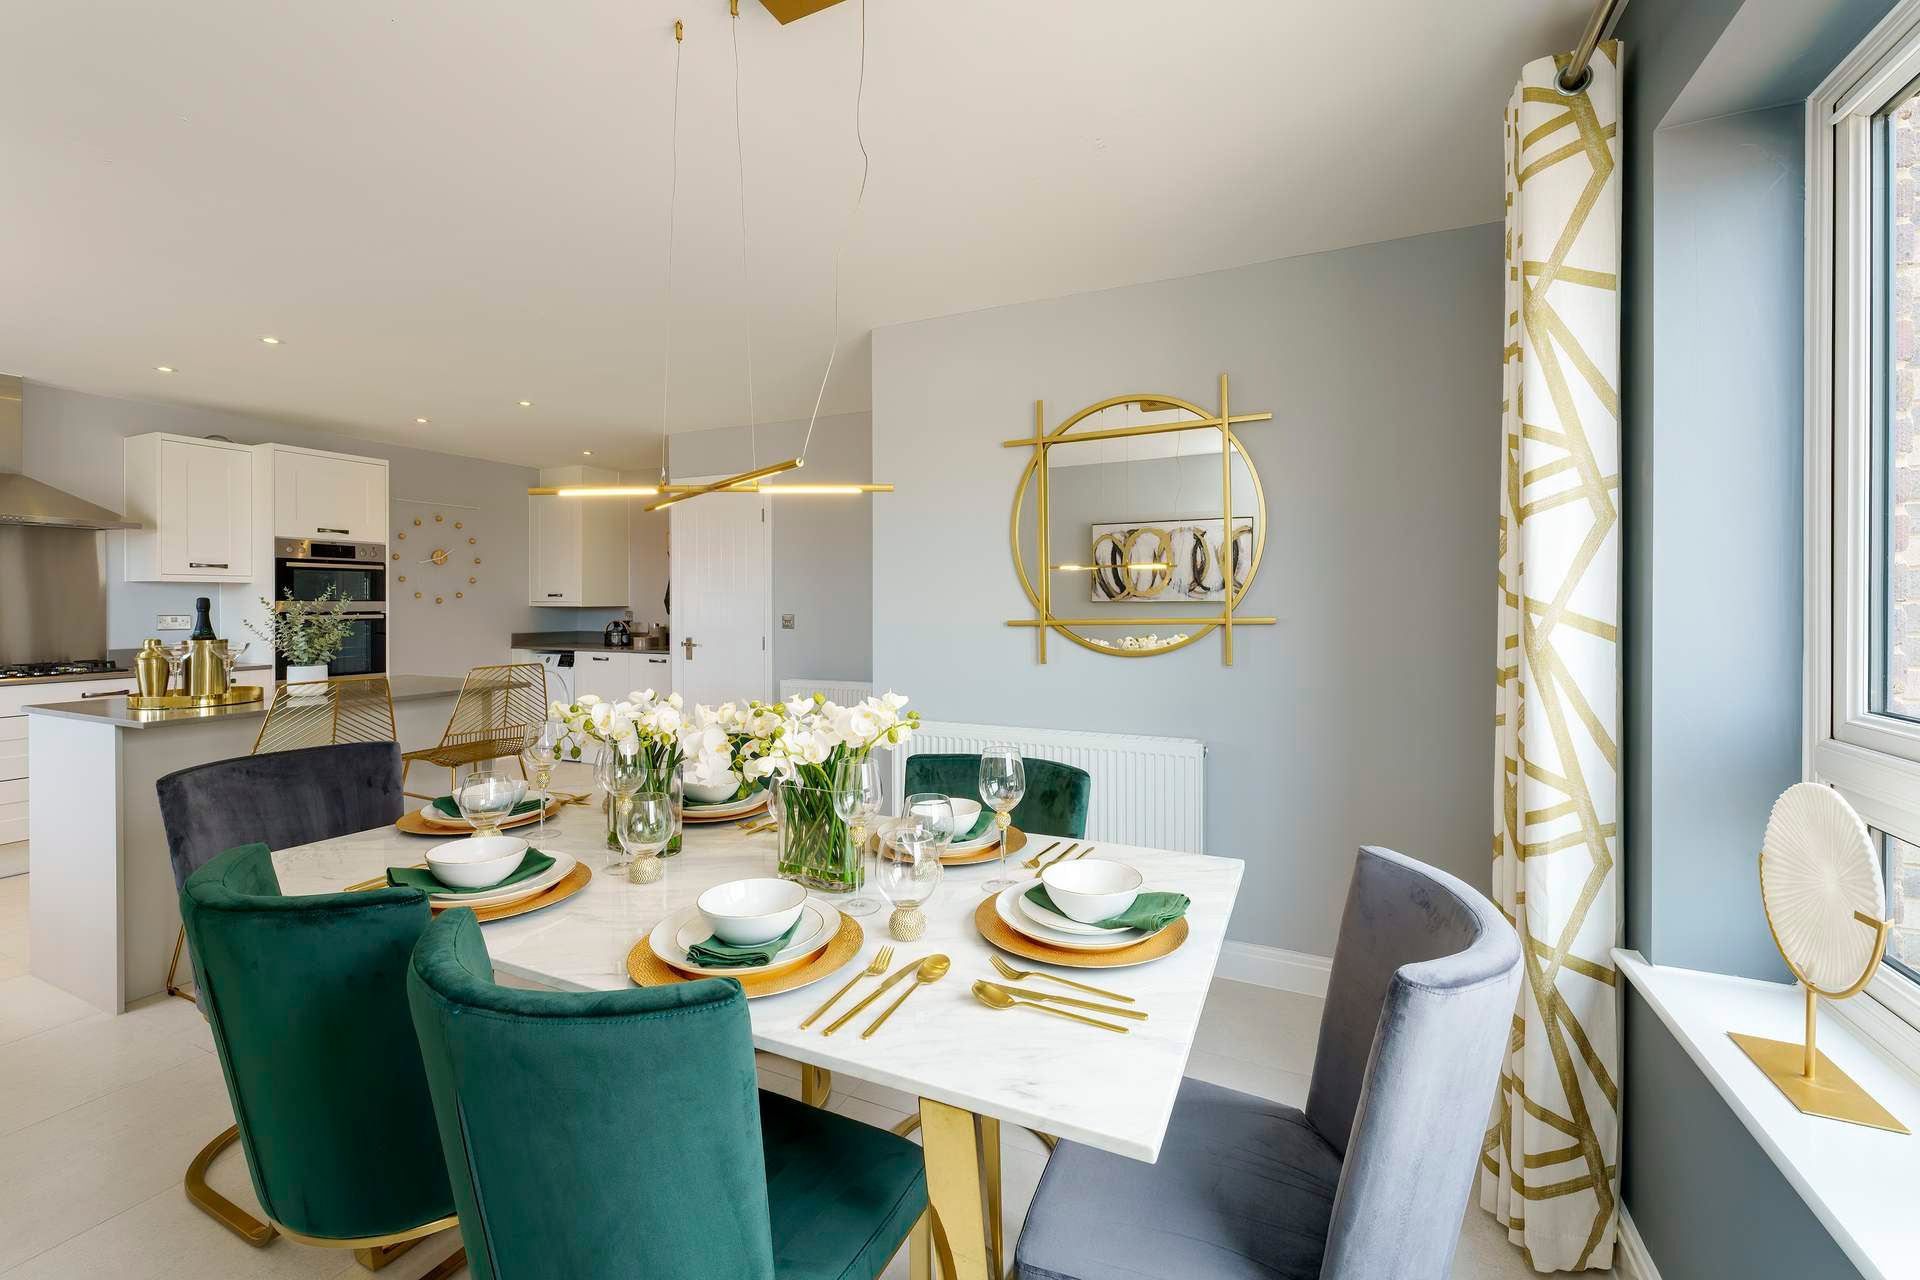 New Show Homes Now Open at Mulgrove Farm Village